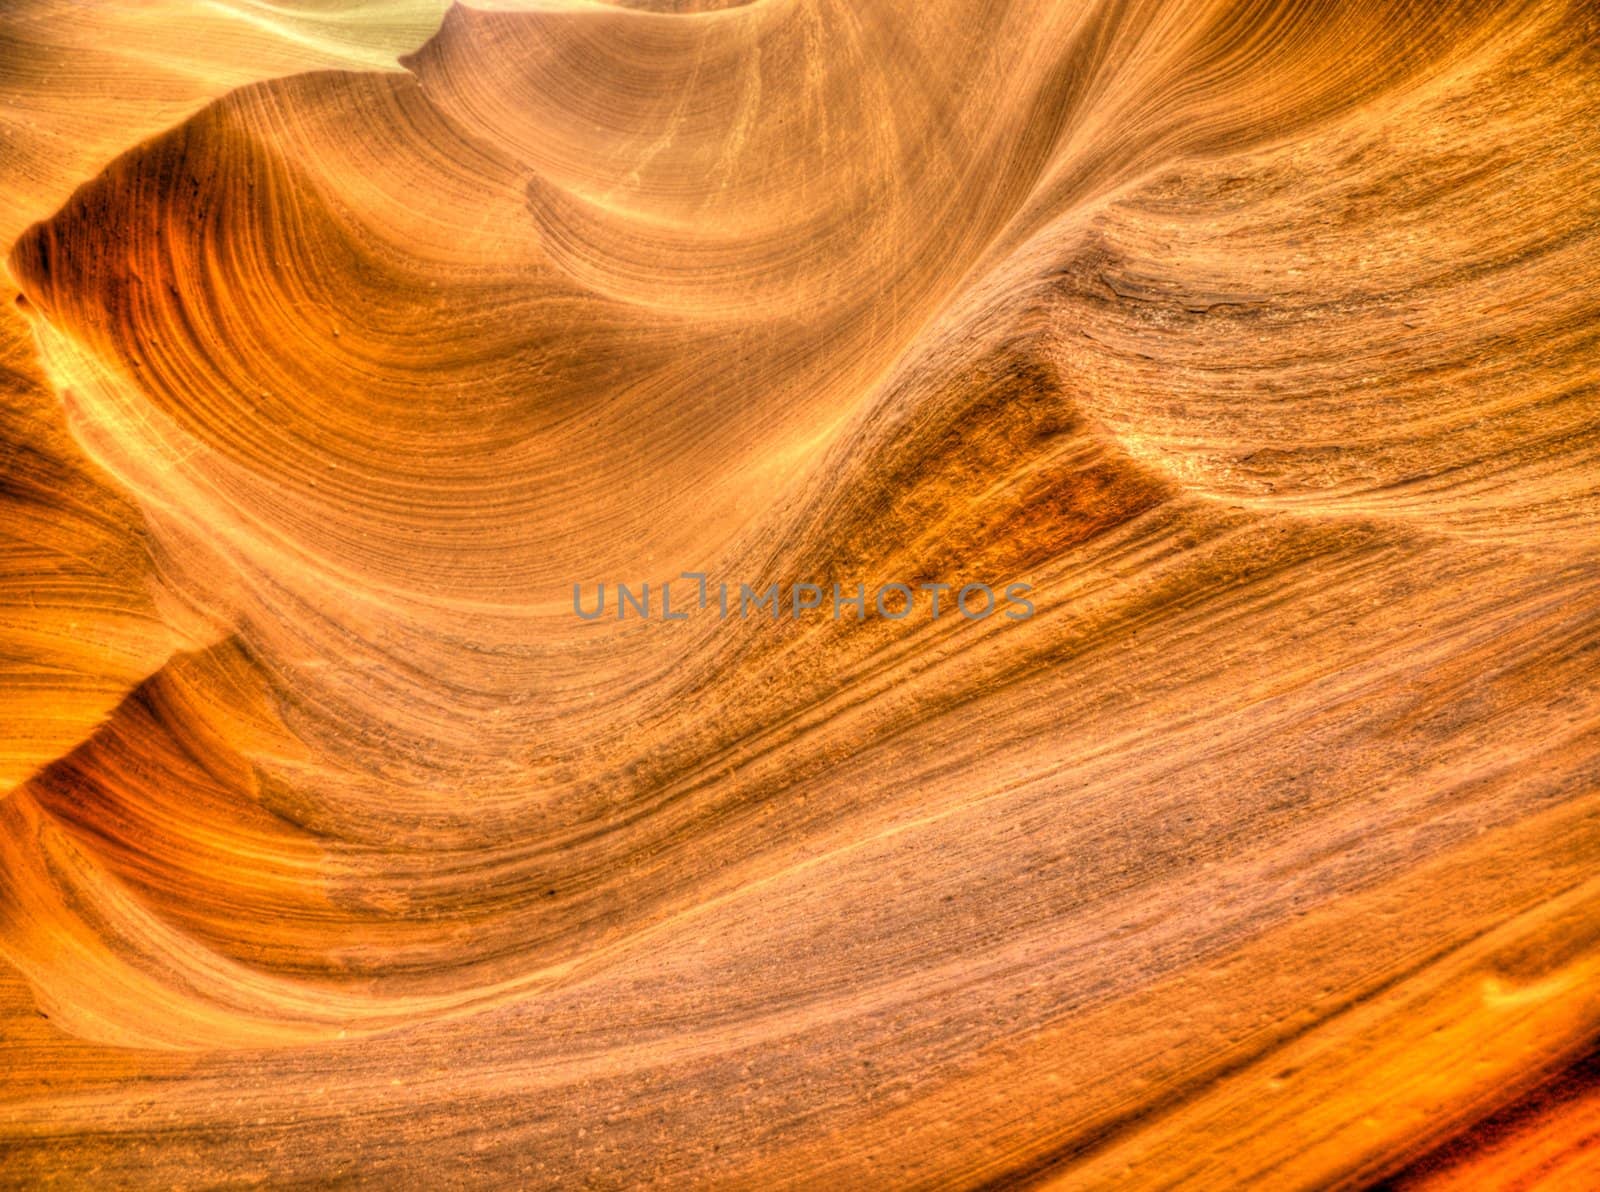 Abstract curves of Antelope Canyon by anderm